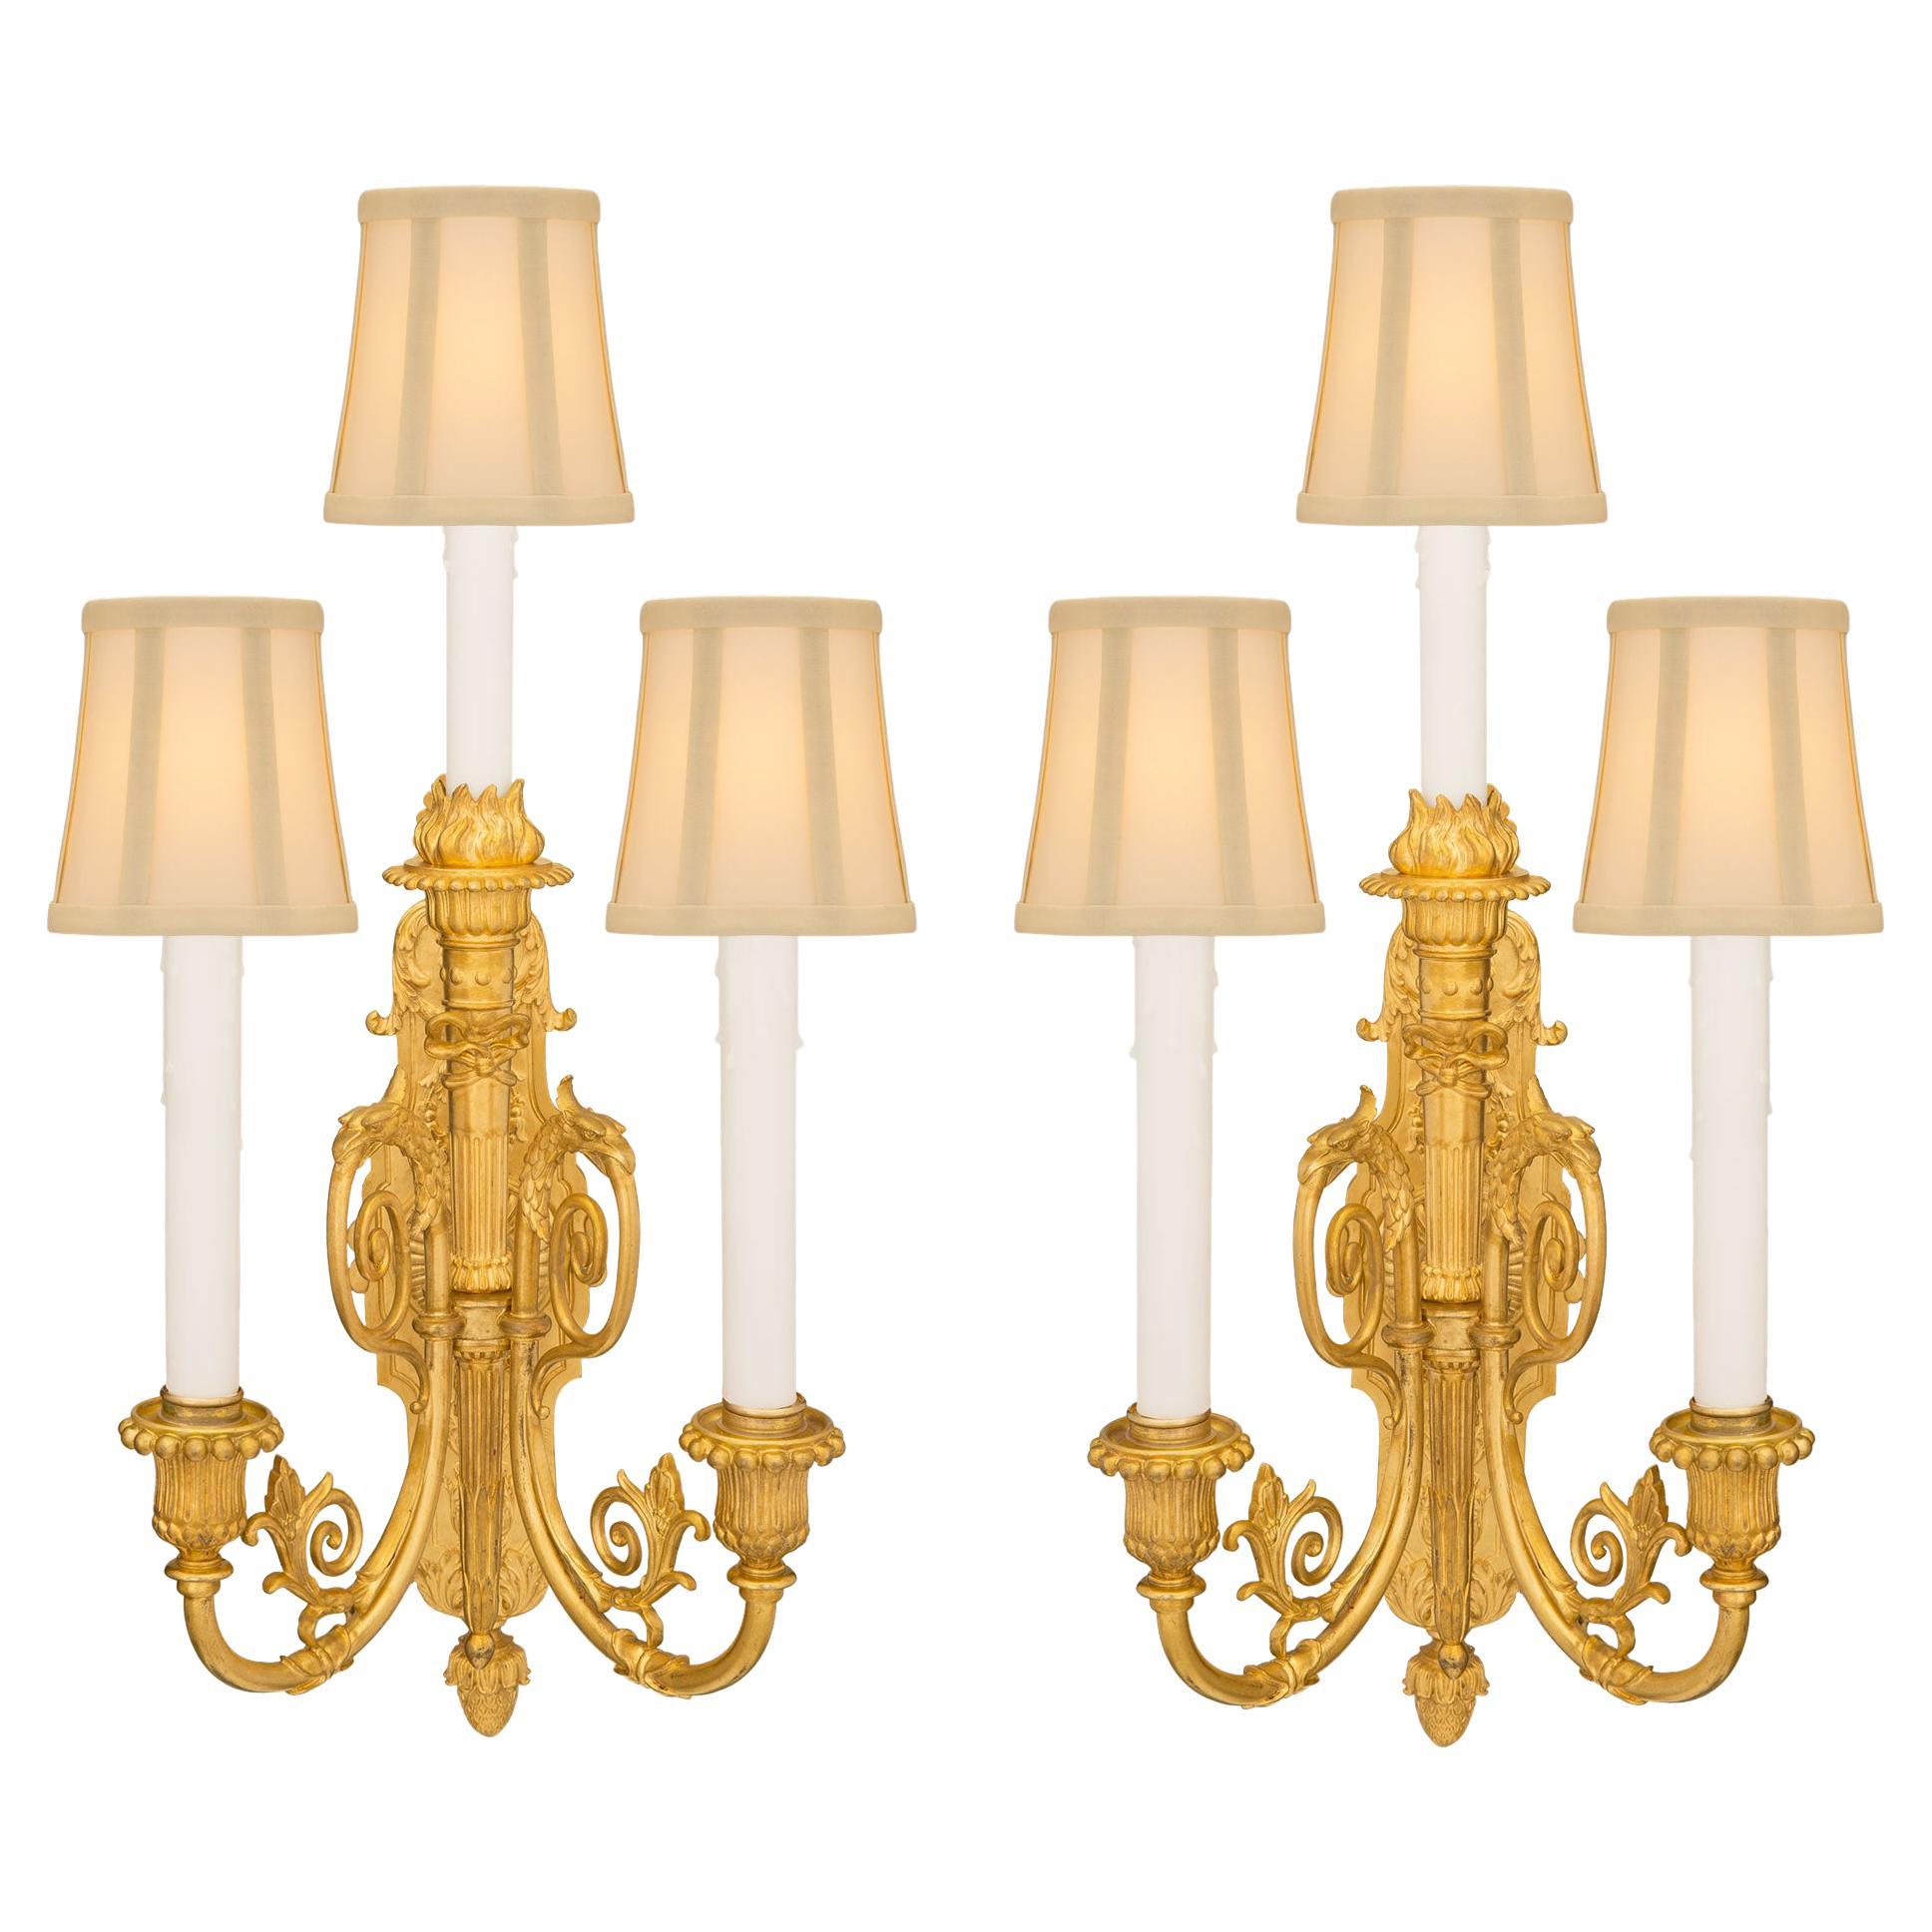 Pair of French 19th Century Ormolu Sconces, Signed Barbedienne